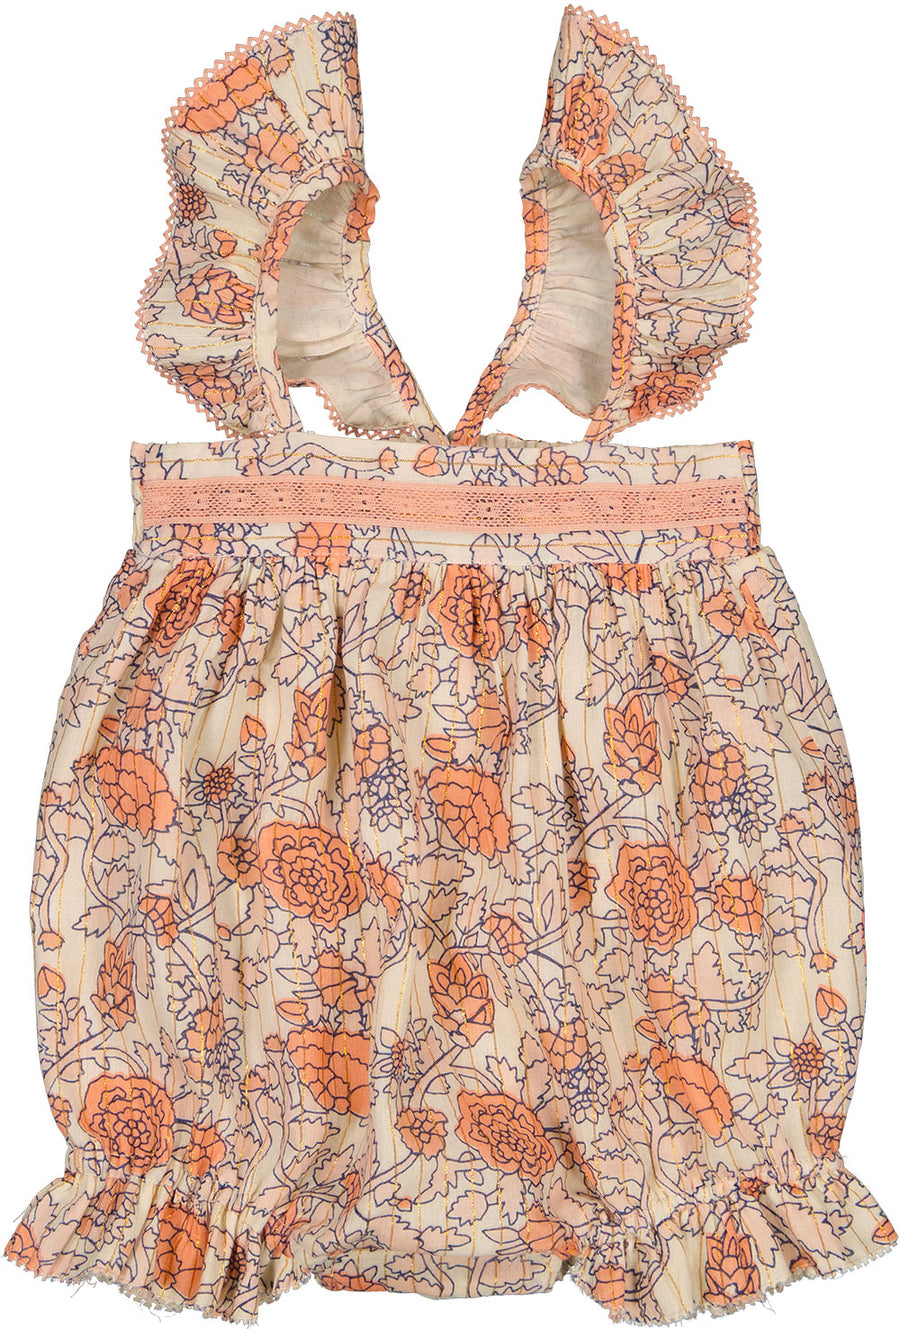 Marveille pink Indian flower romper by Louis Louise